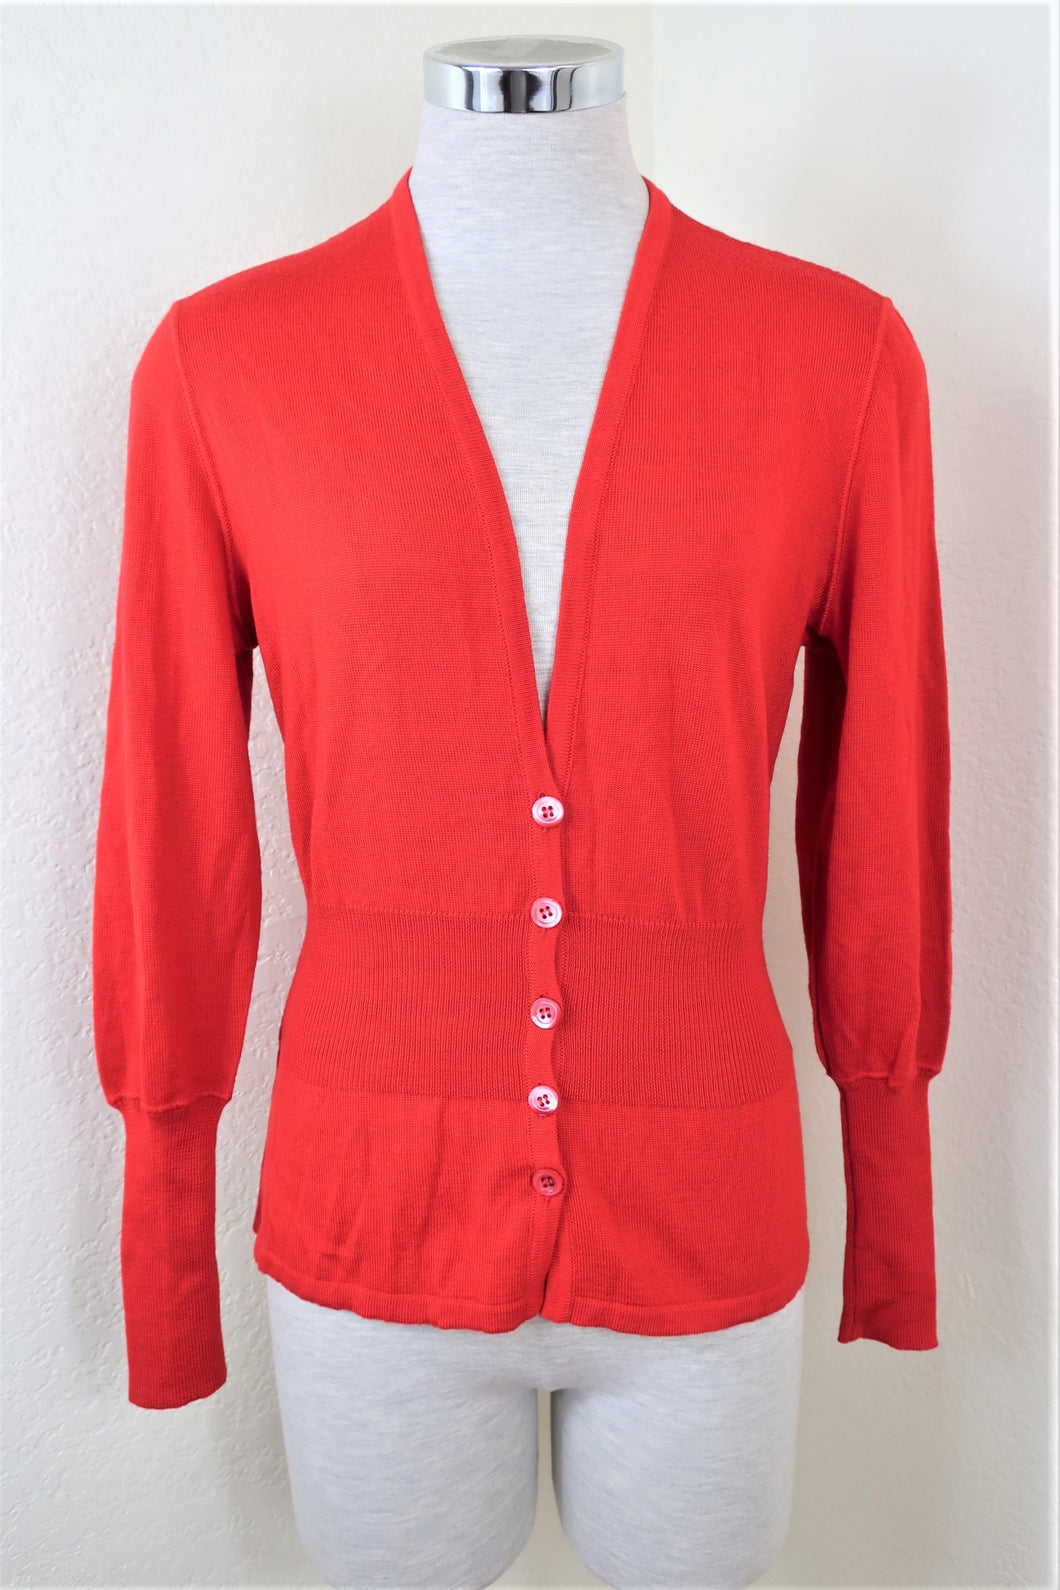 Vintage CHRISTIAN DIOR Coordonnes Red Button Sweater Top Blouse